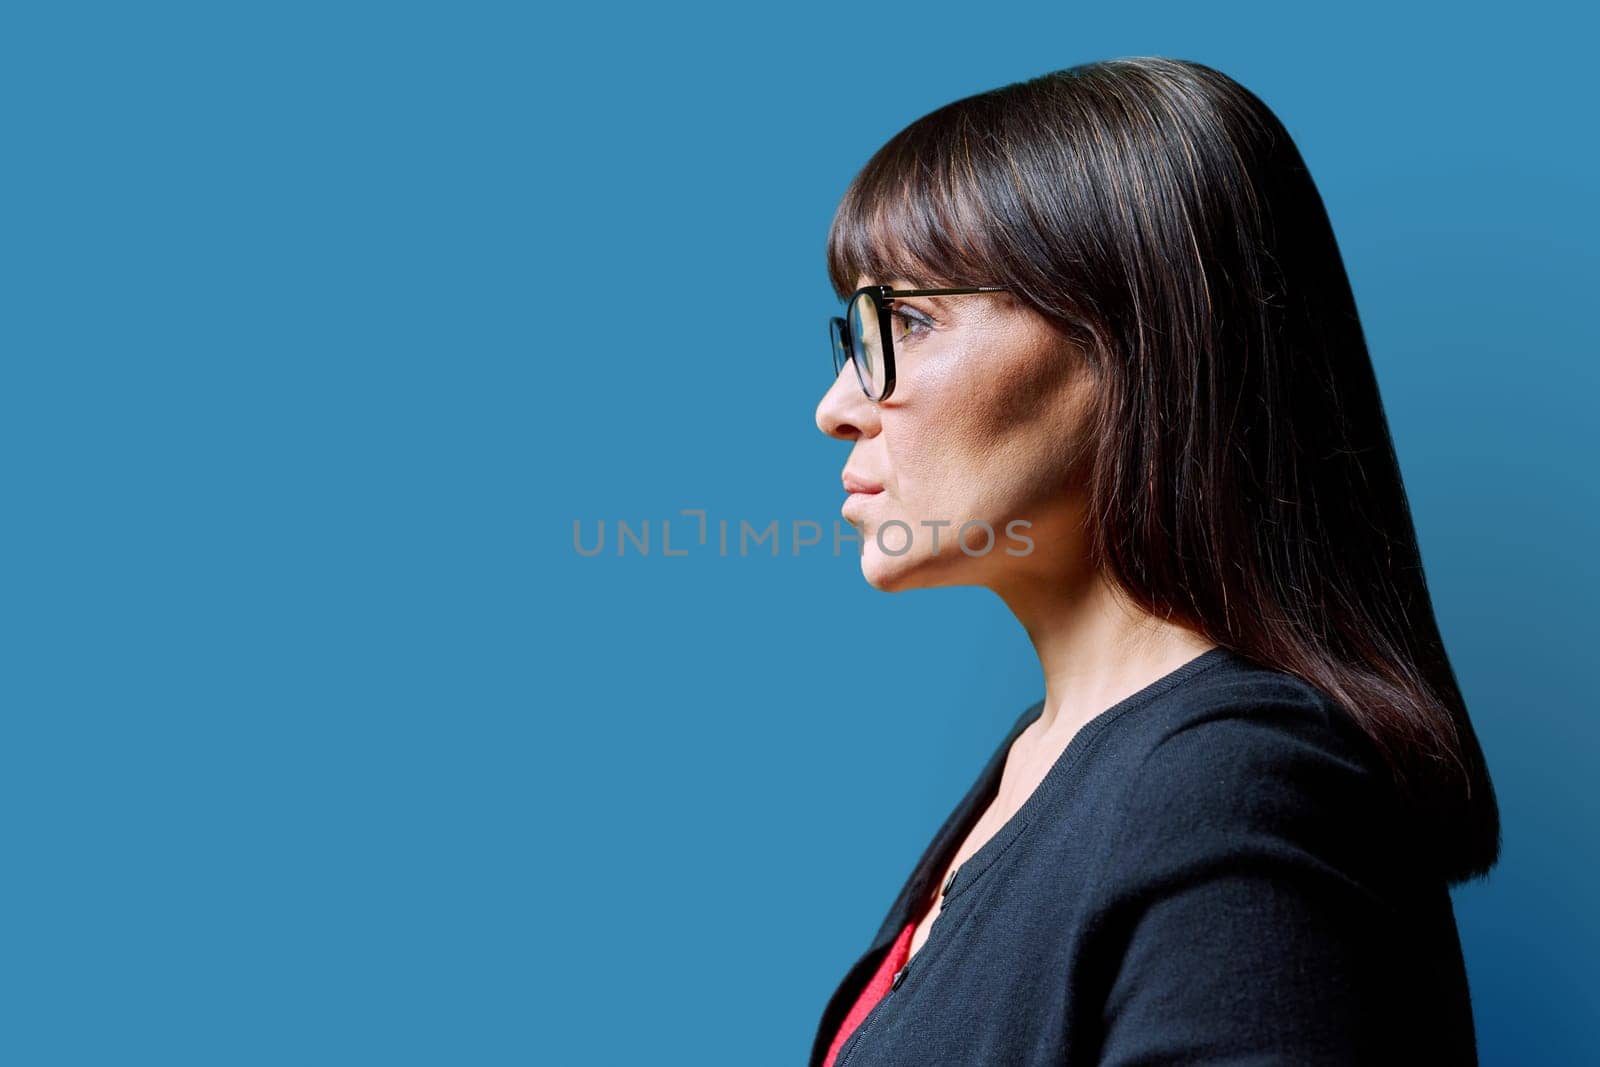 Profile view of middle aged serious woman looking forward, blue studio background, copy space for advertising image text. Mature business confident successful female. Marketing sales services, people